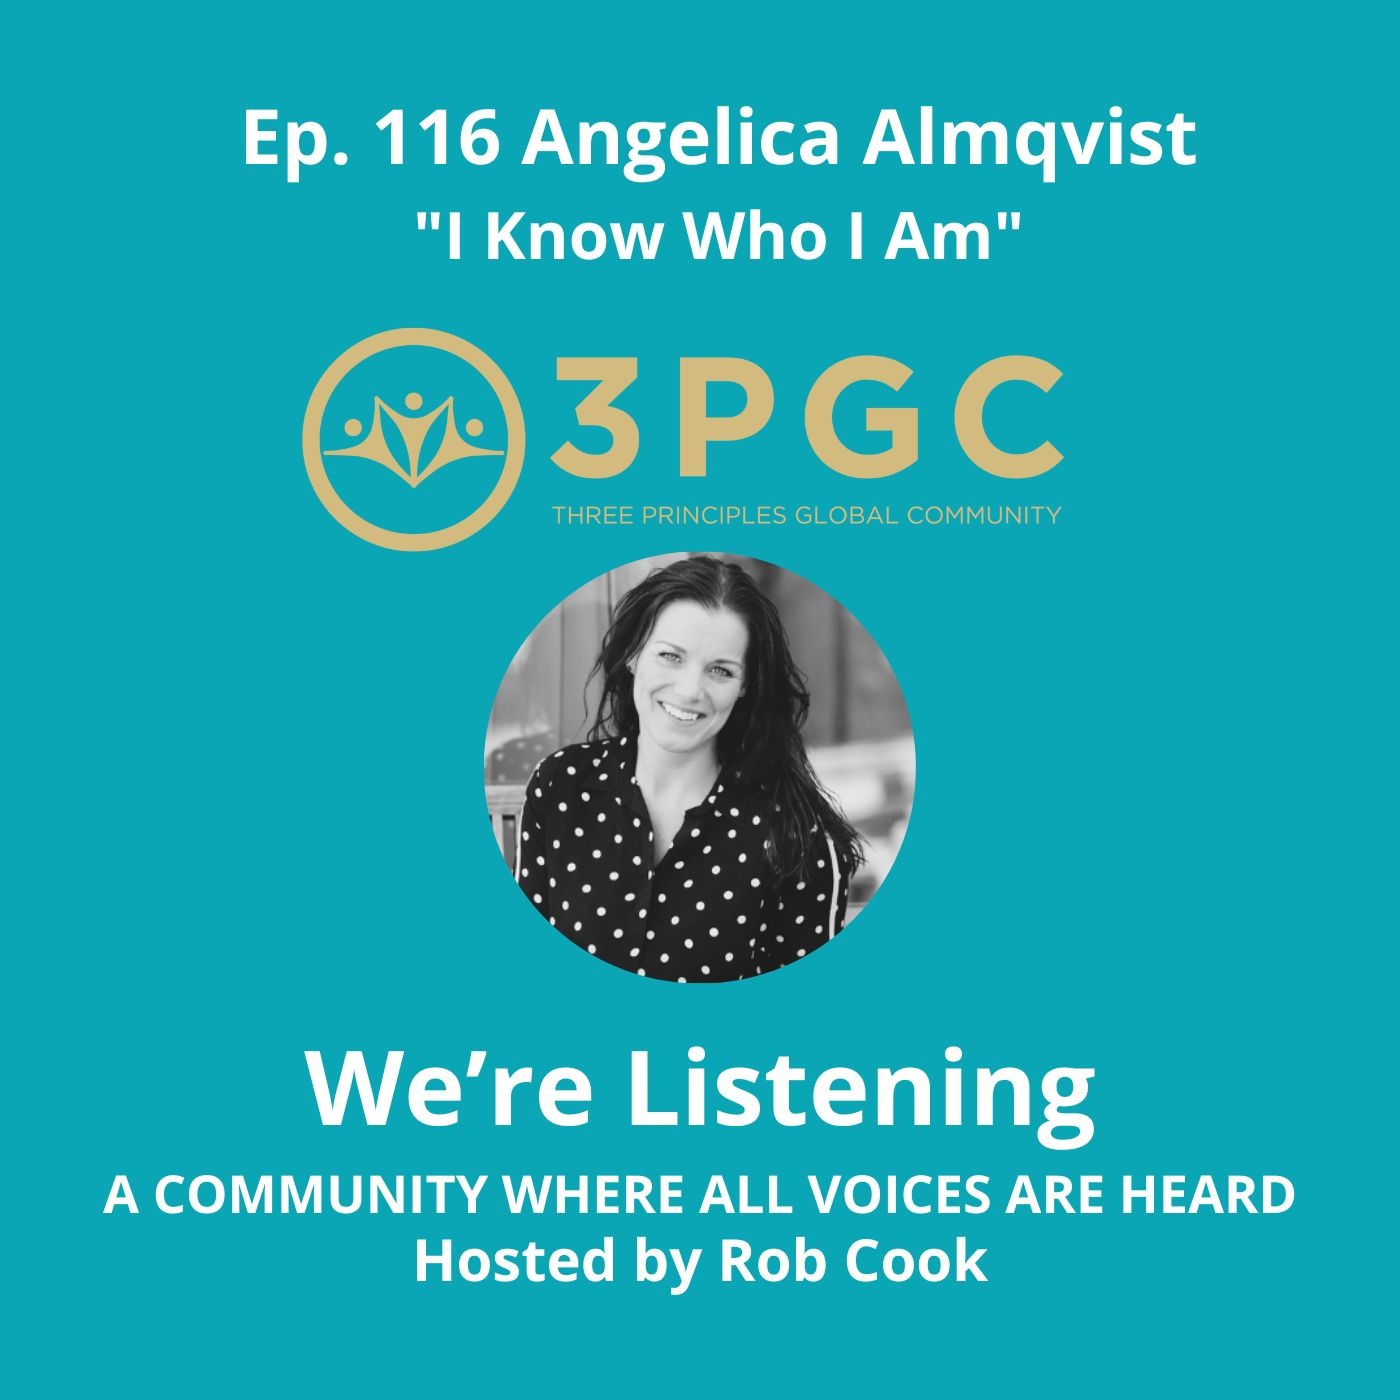 Ep. 116 Angelica Almqvist “I Know Who I Am”